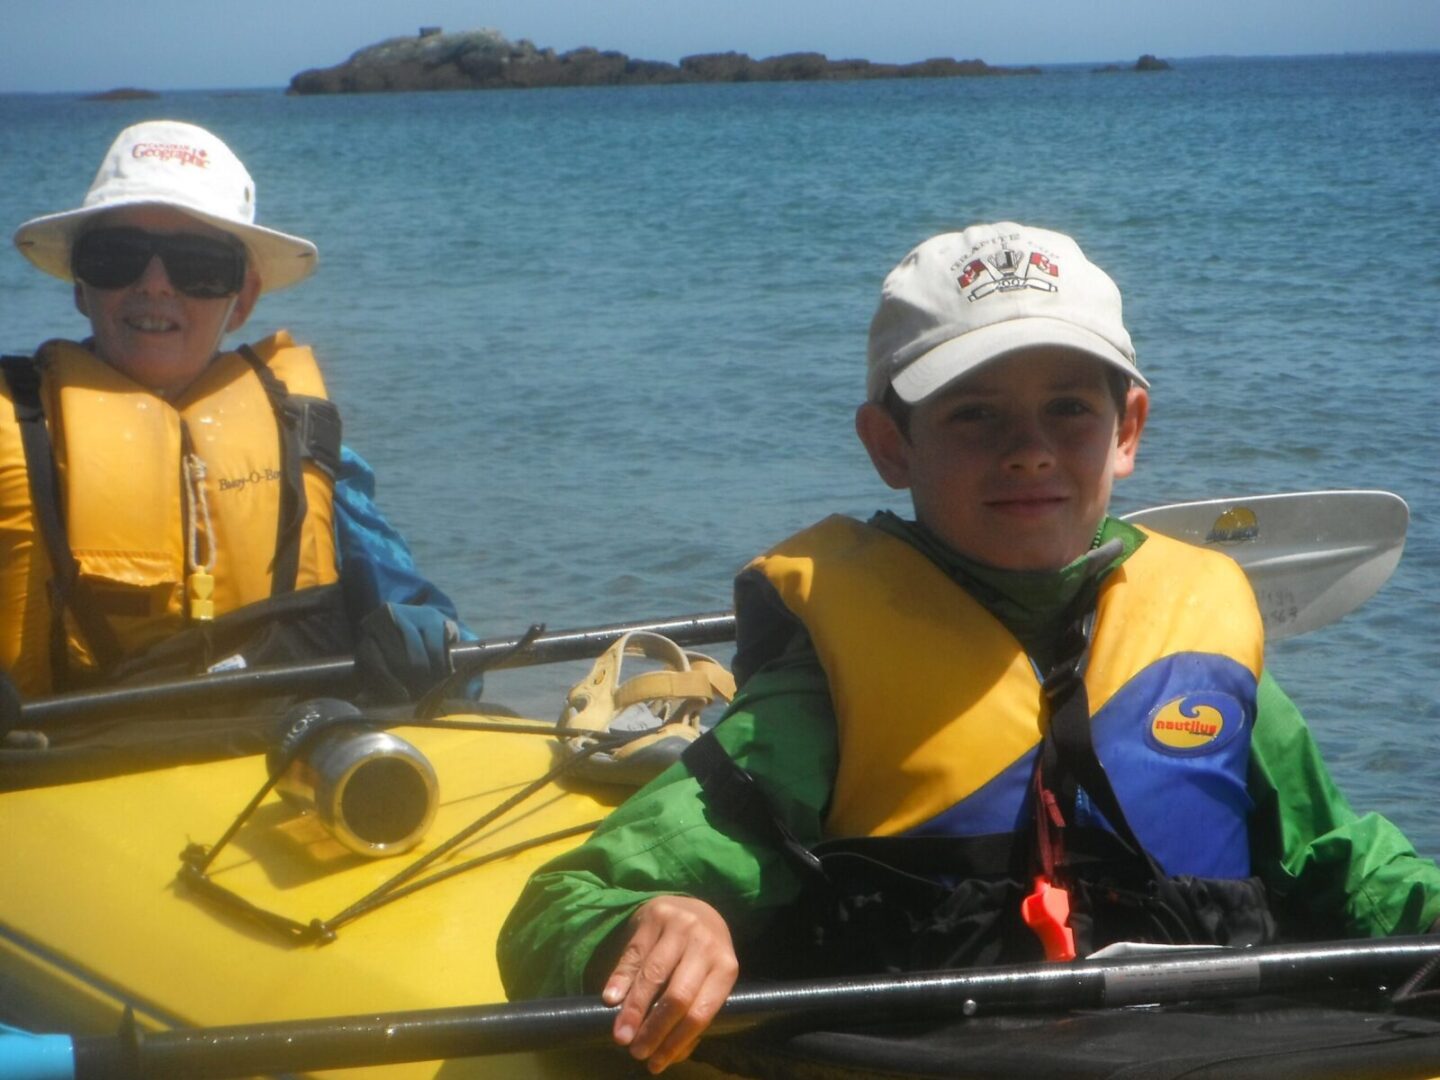 A boy and a girl in a yellow kayak.